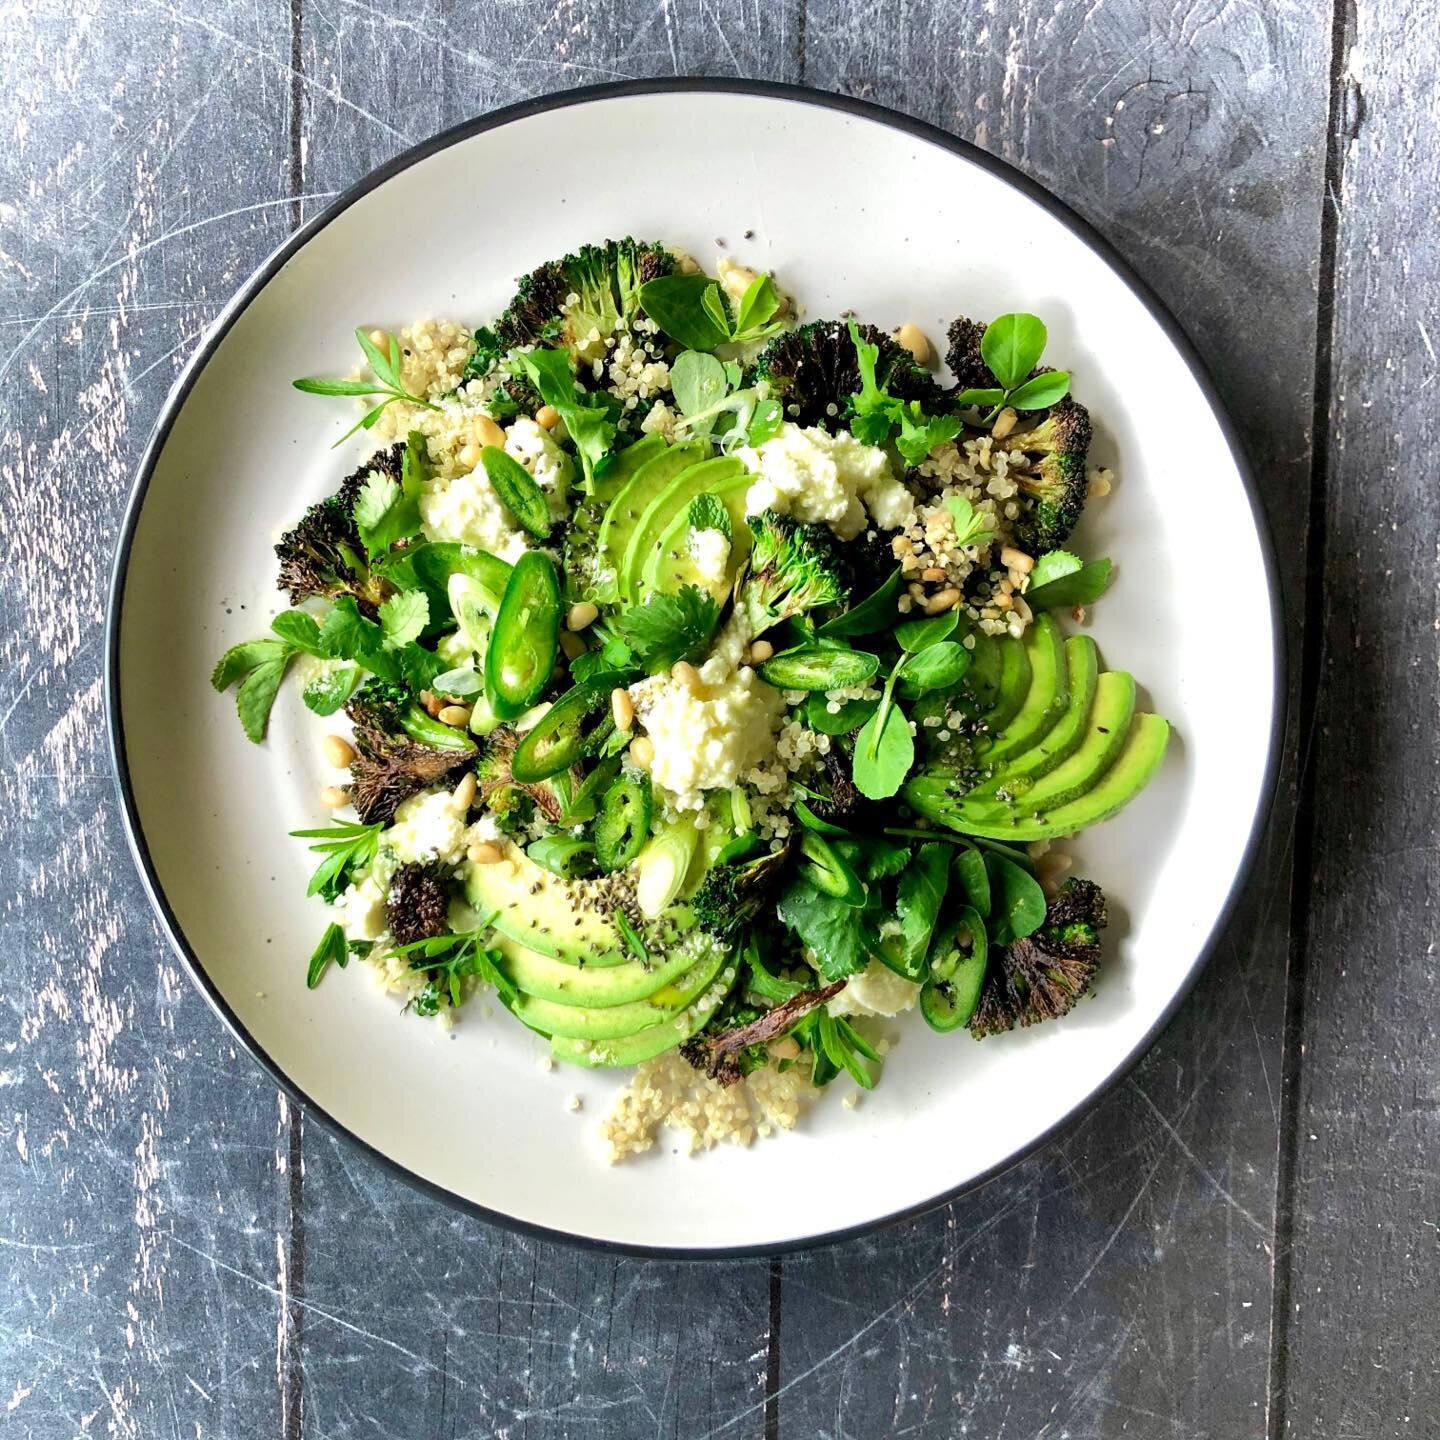 A perfect way to use up all that delicious broccoli growing in your garden! This is my go to salad. Charred broccoli, goats cheese, avocado and pine nuts. Need I say more!?

#broccolirecipes #broccolisalad #plantbasedrecipes #vegetarianrecipes #healt